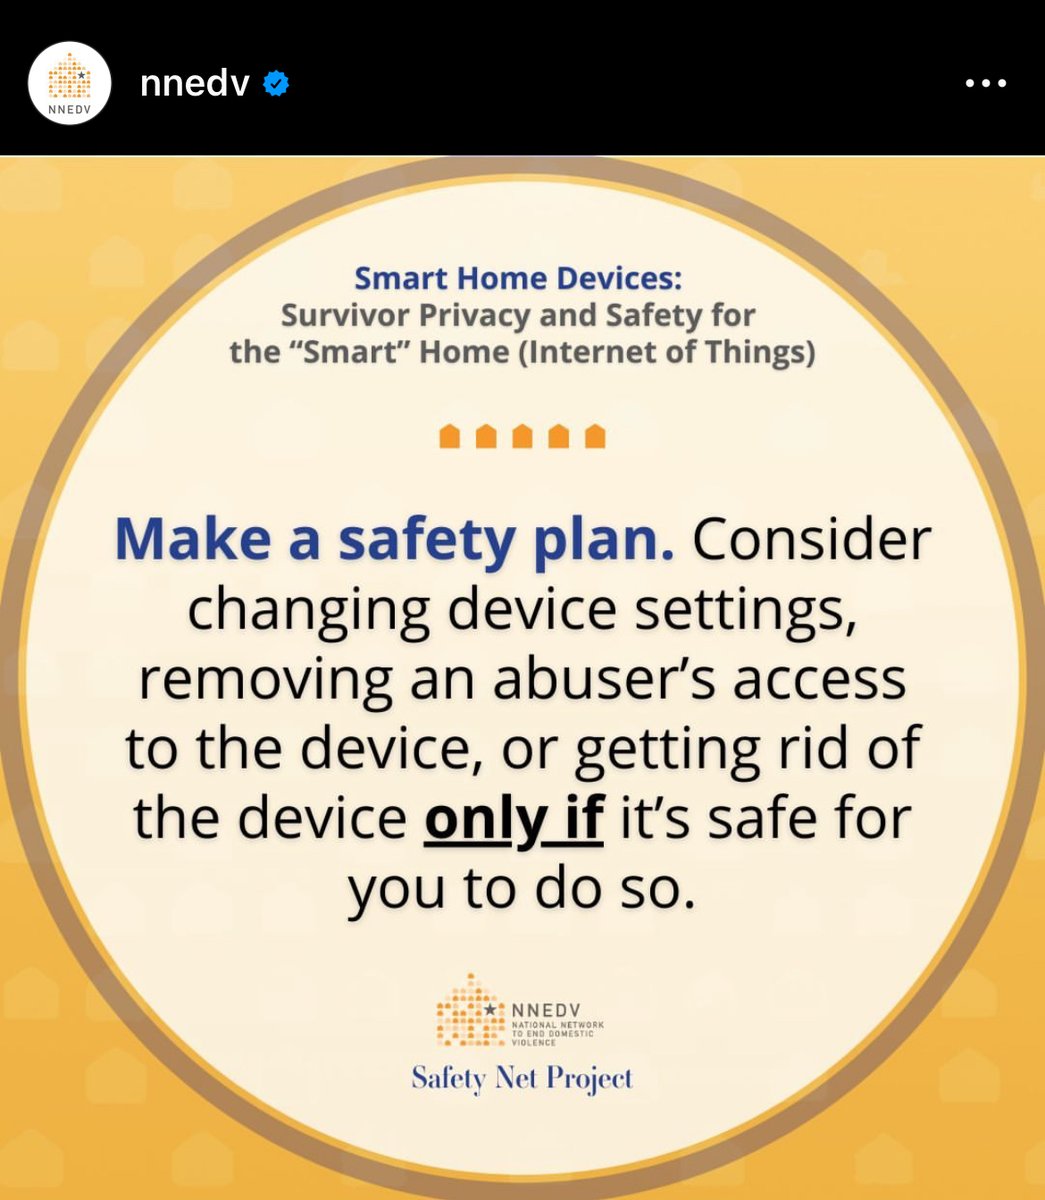 Repost from NNEDV:Internet-connected 'smart' devices can be helpful and convenient, but they can also be misused by abusers in order to harass and control a victim. Swipe ➡️ and learn more if you're a survivor concerned about your devices: TechSafety.org/Smart-Home